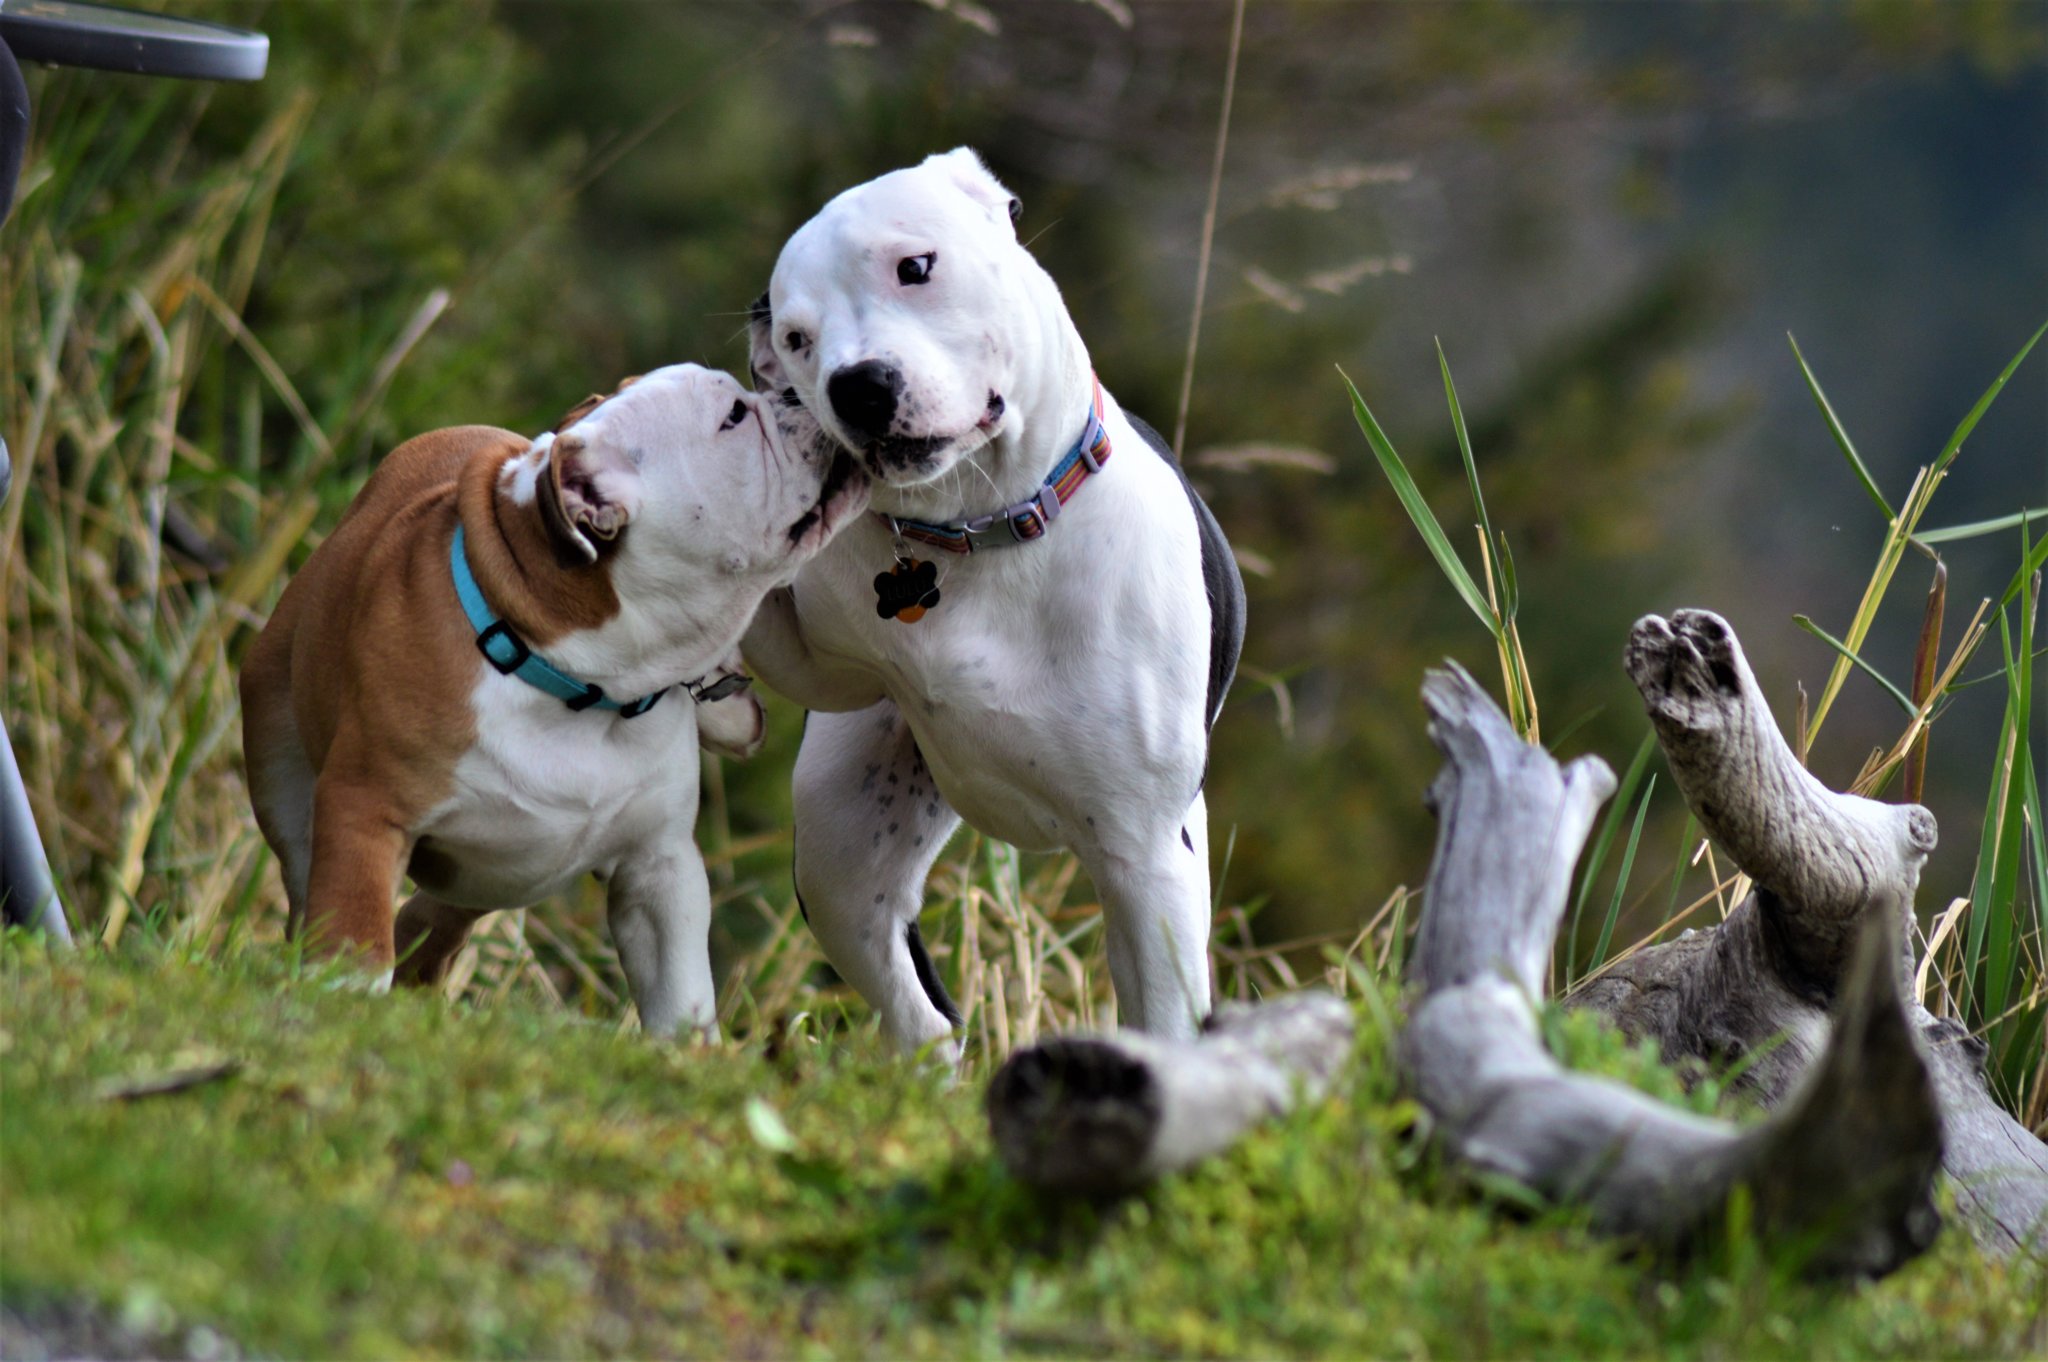 Dogs playing with each other